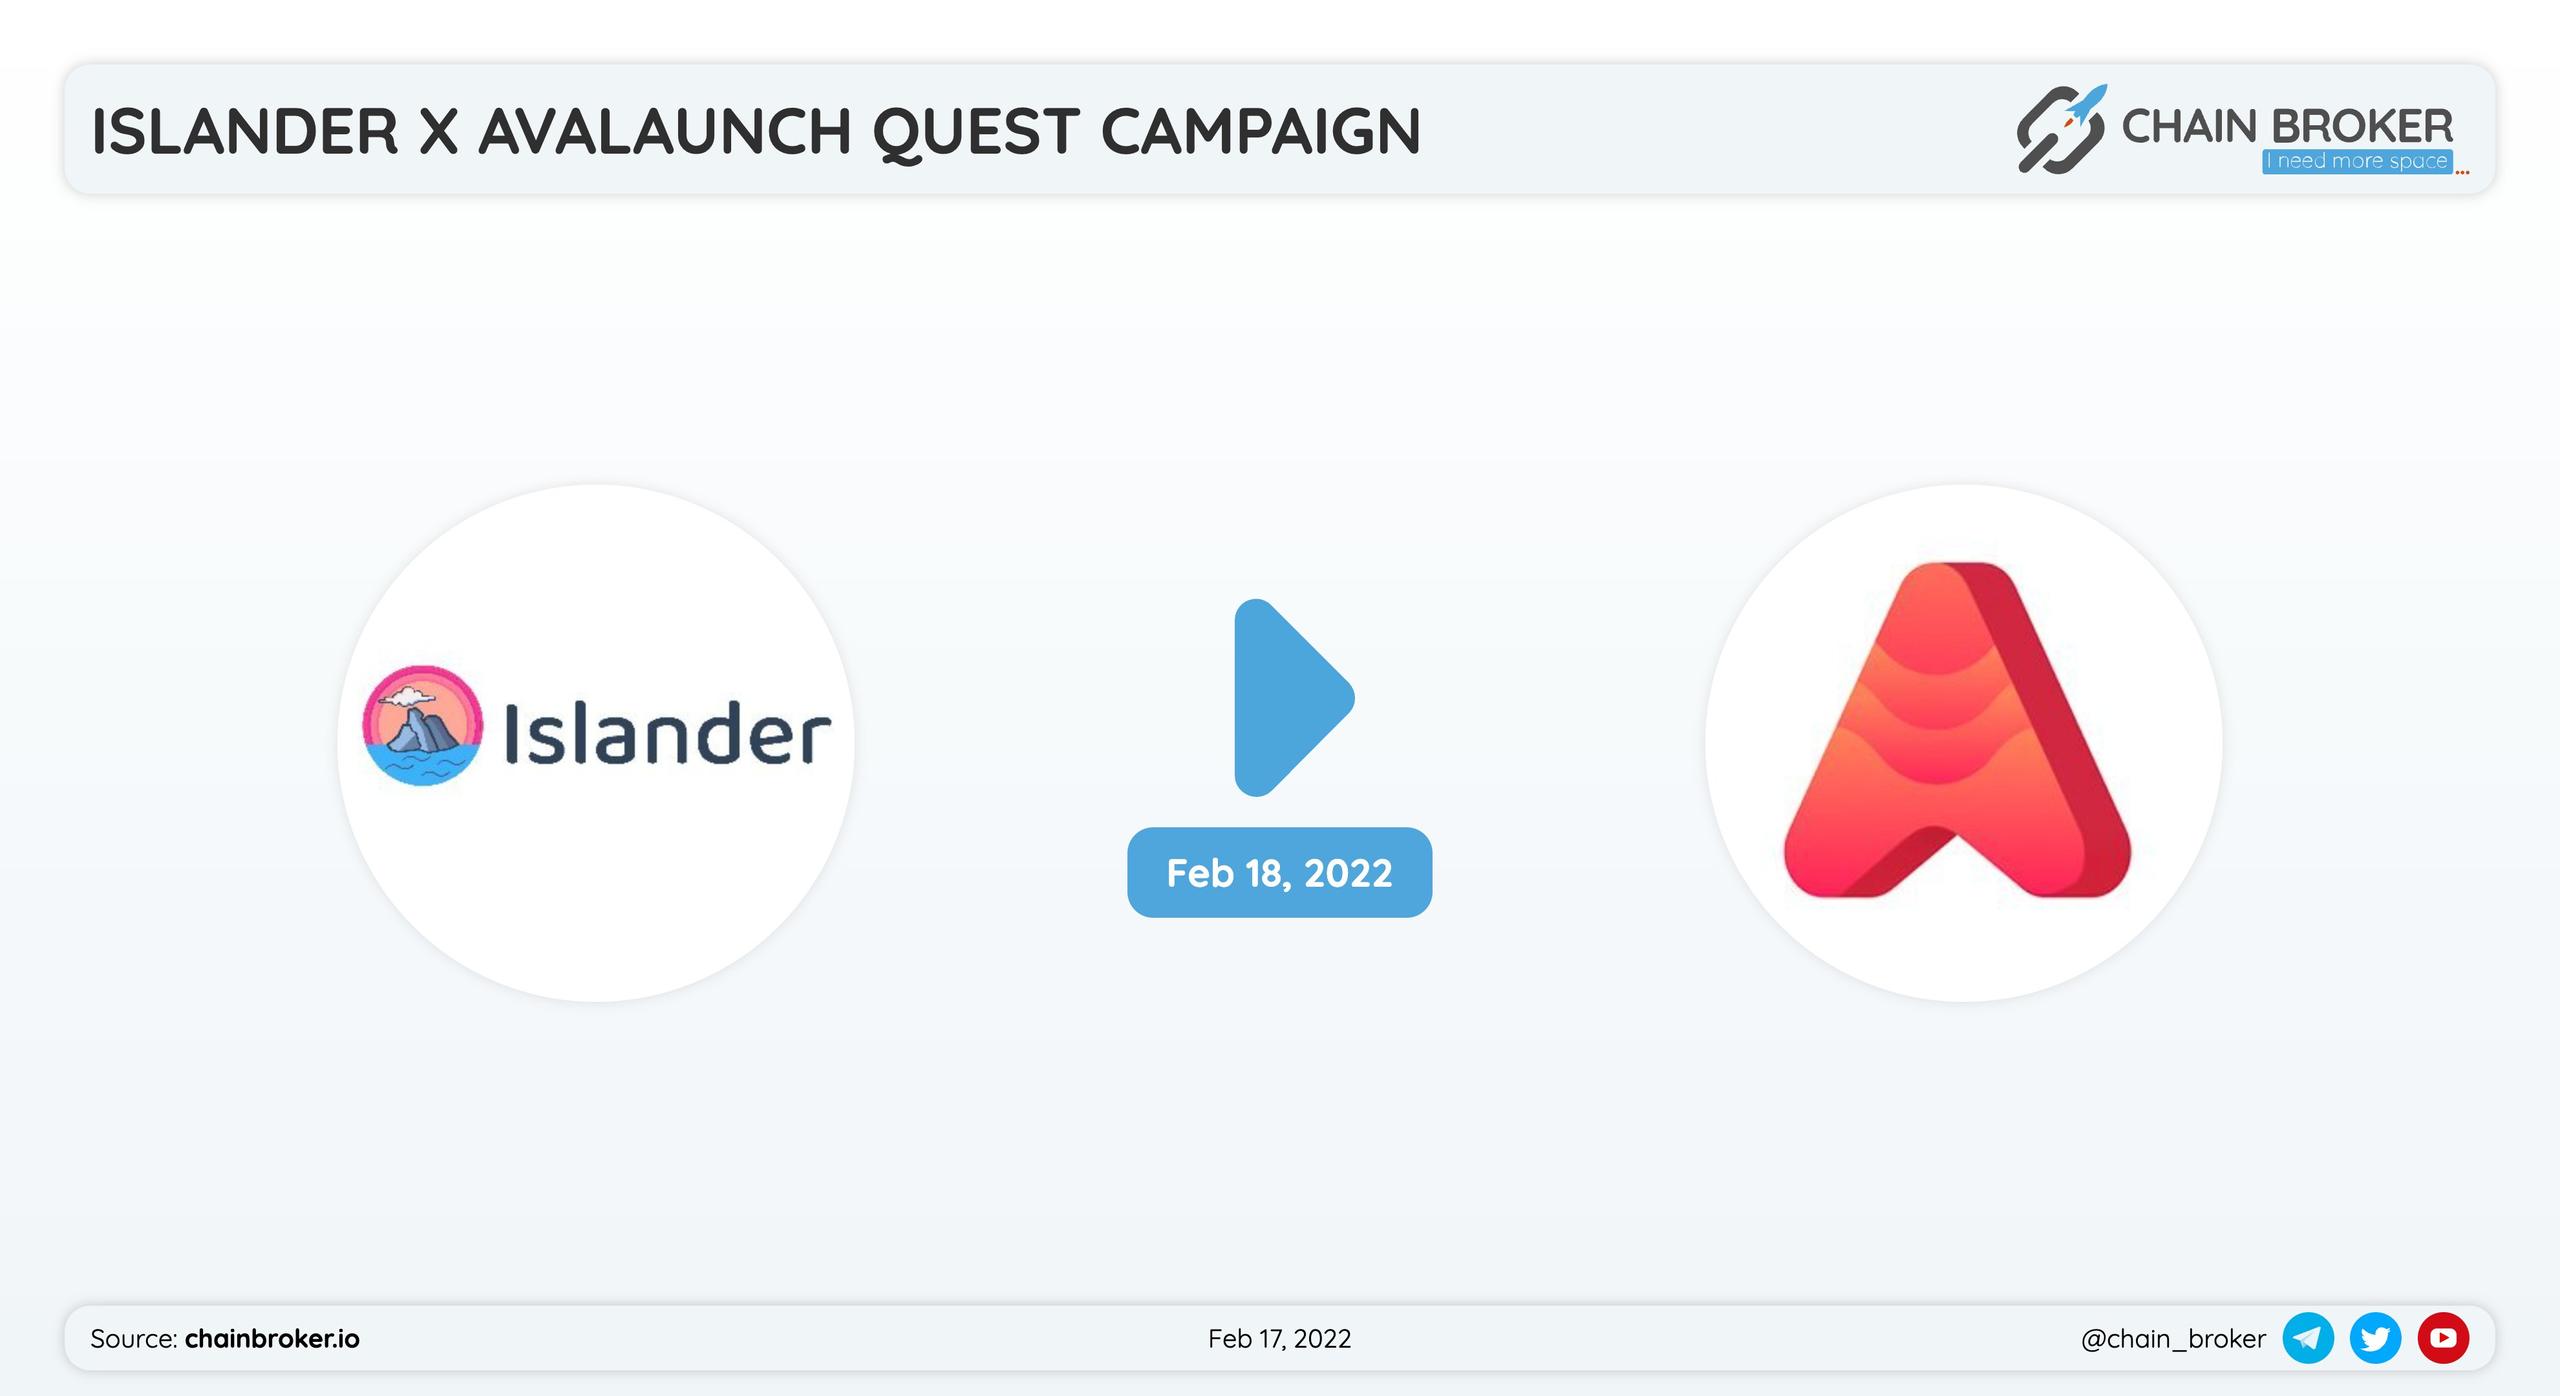 Islander has partnered with Avalaunch for a quest campaign.